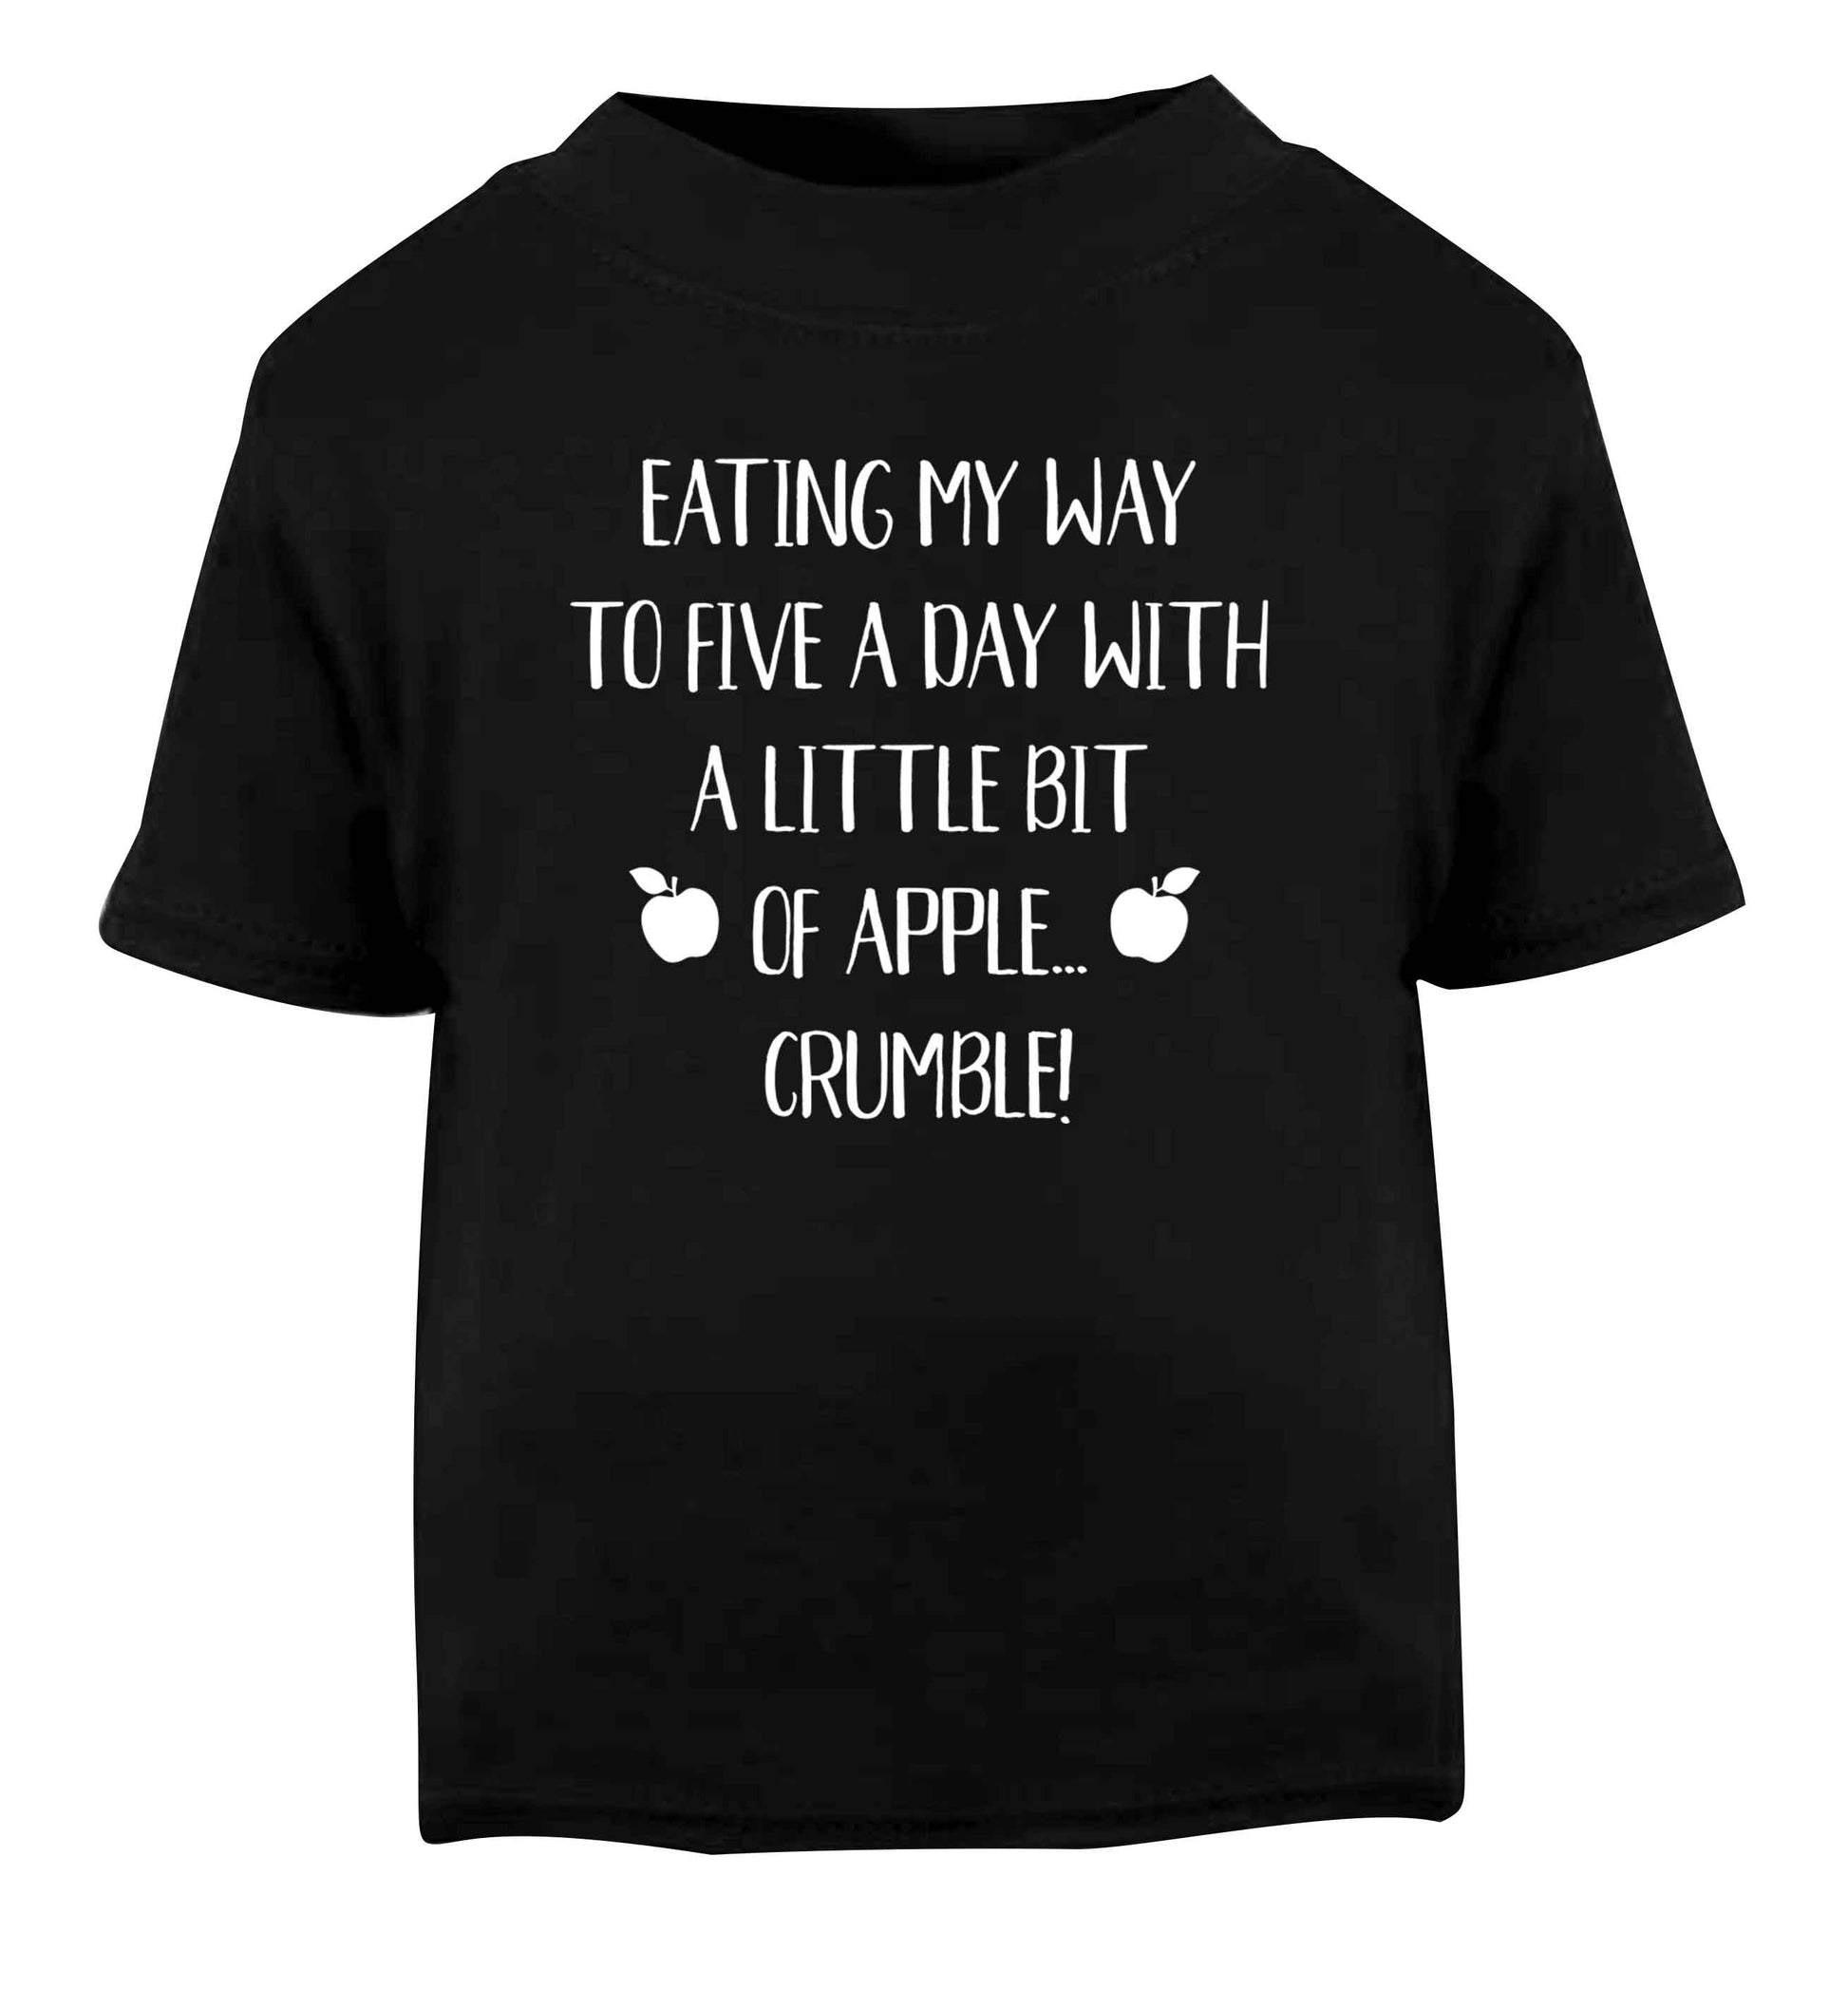 Eating my way to five a day with a little bit of apple crumble Black Baby Toddler Tshirt 2 years